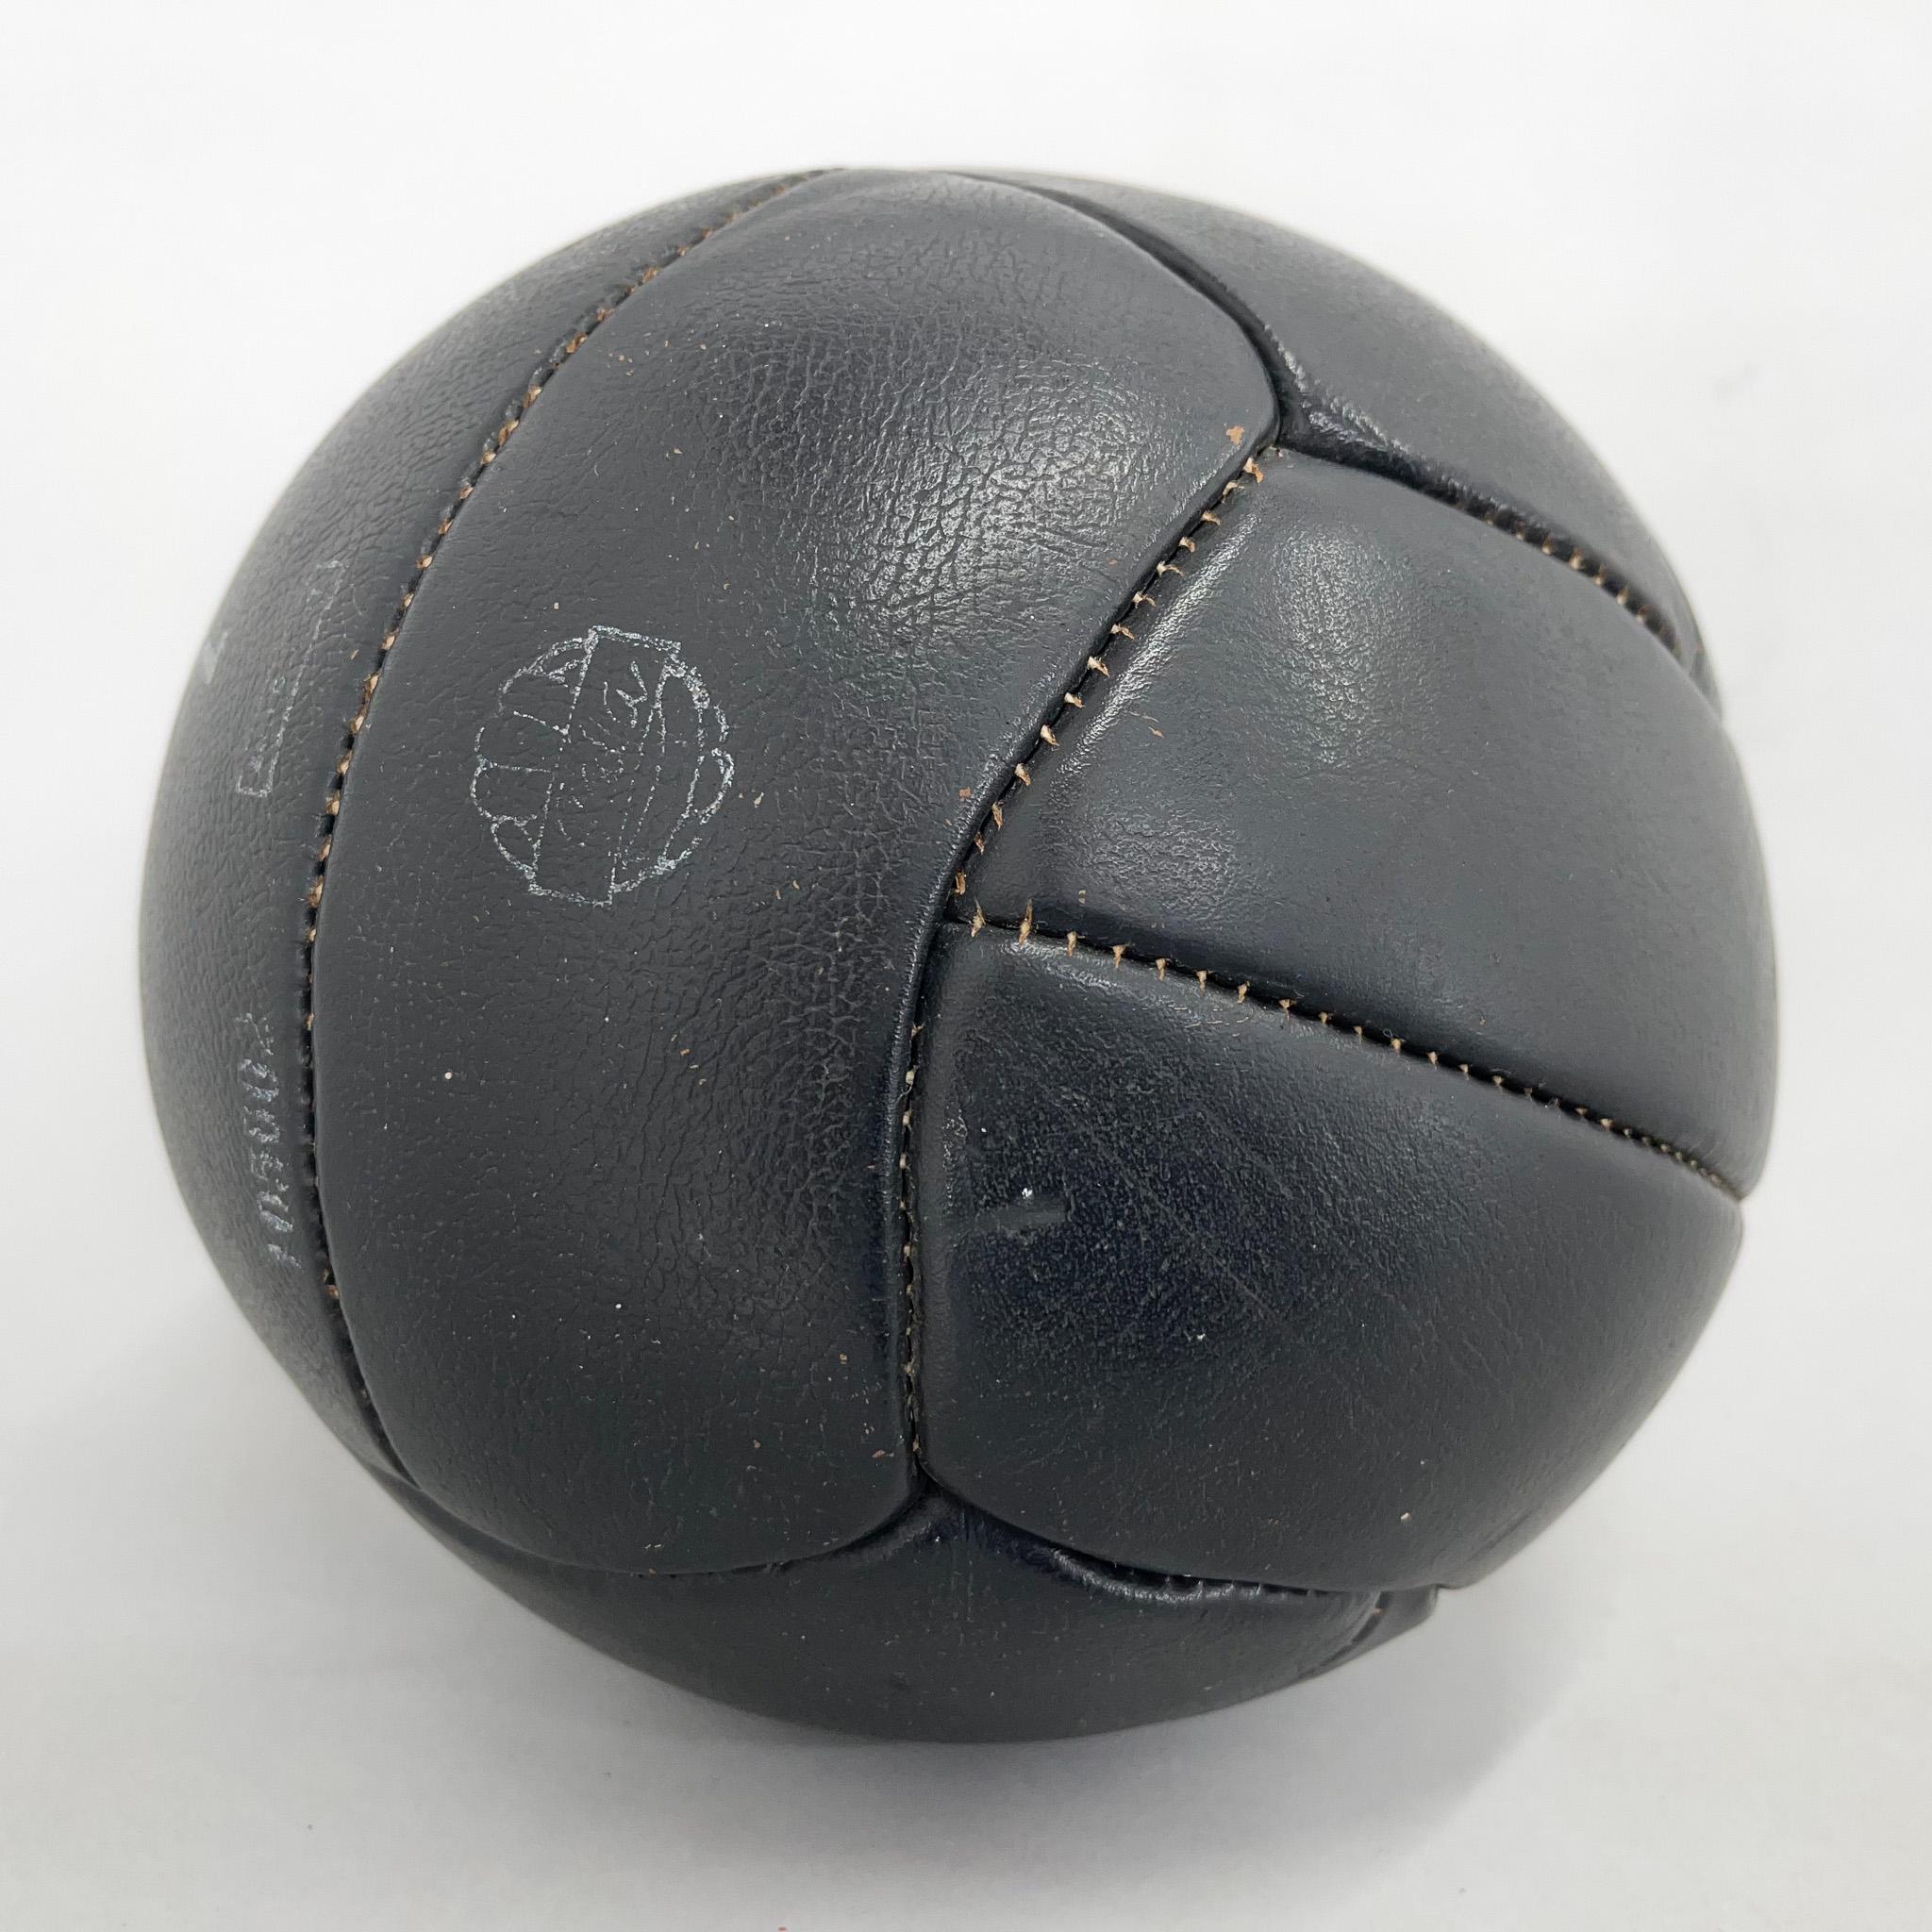 Original vintage heavy leather training ball with beautiful patina. The ball is made of handstitched genuine leather in former Czechoslovakia by Gala company in the 1930s. It can be used as an original interior accessory or as a stylish training